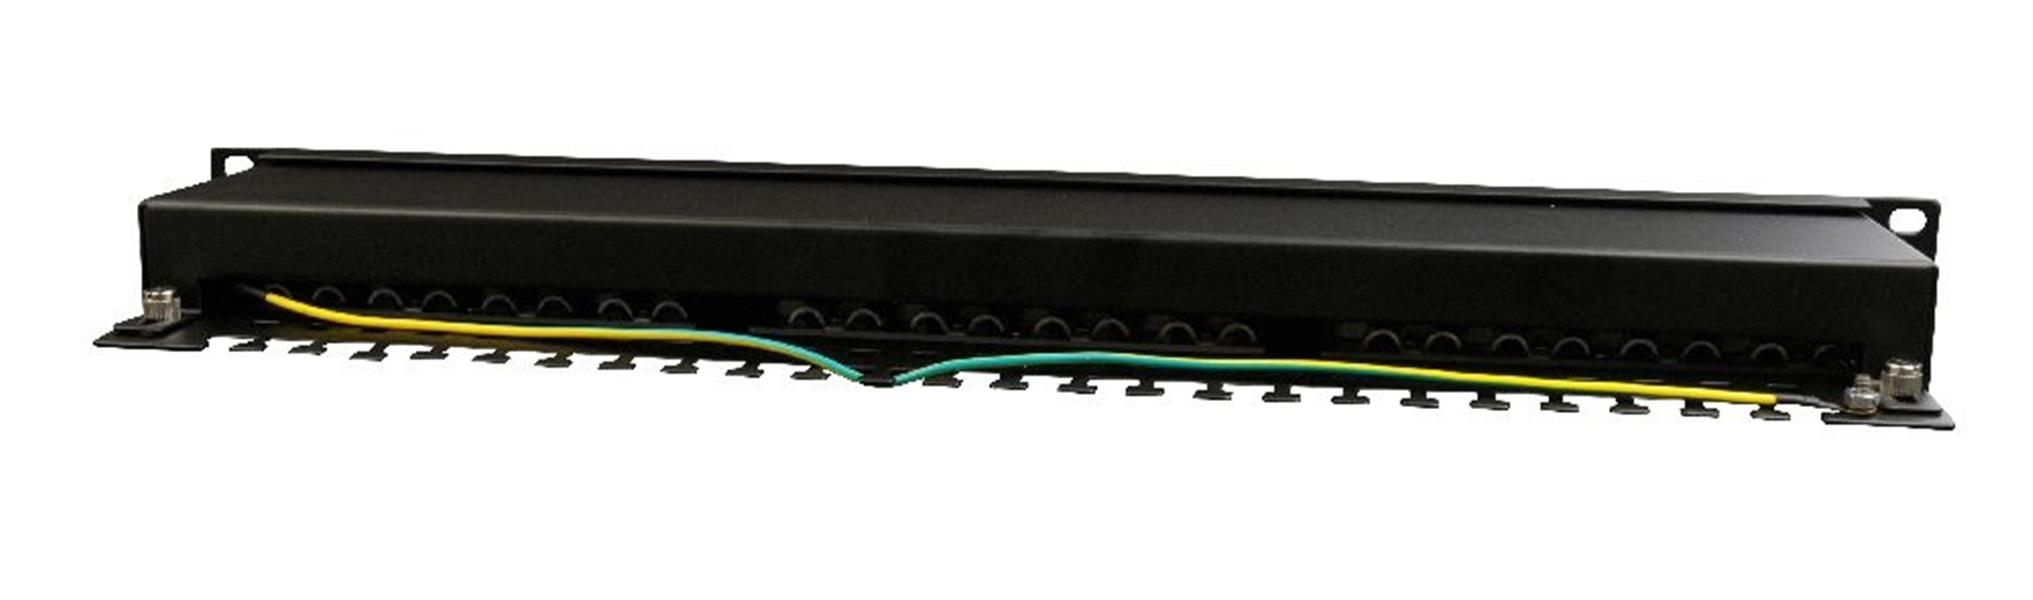 Cat5e 24-poorts patchpanel